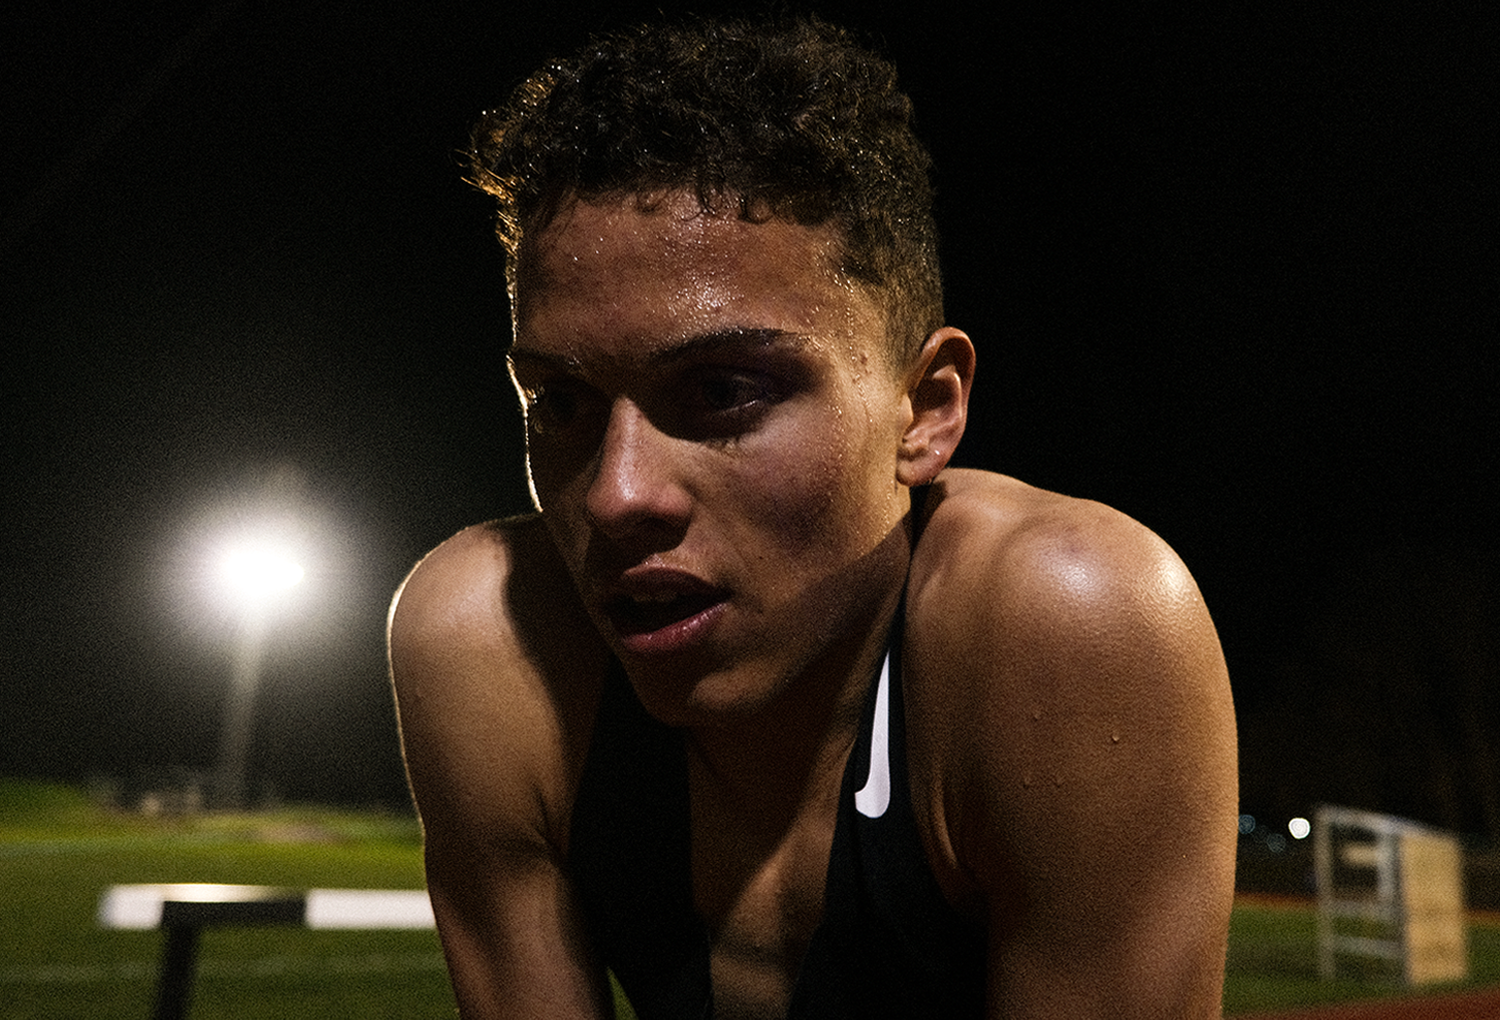 athlete sweating after a running event